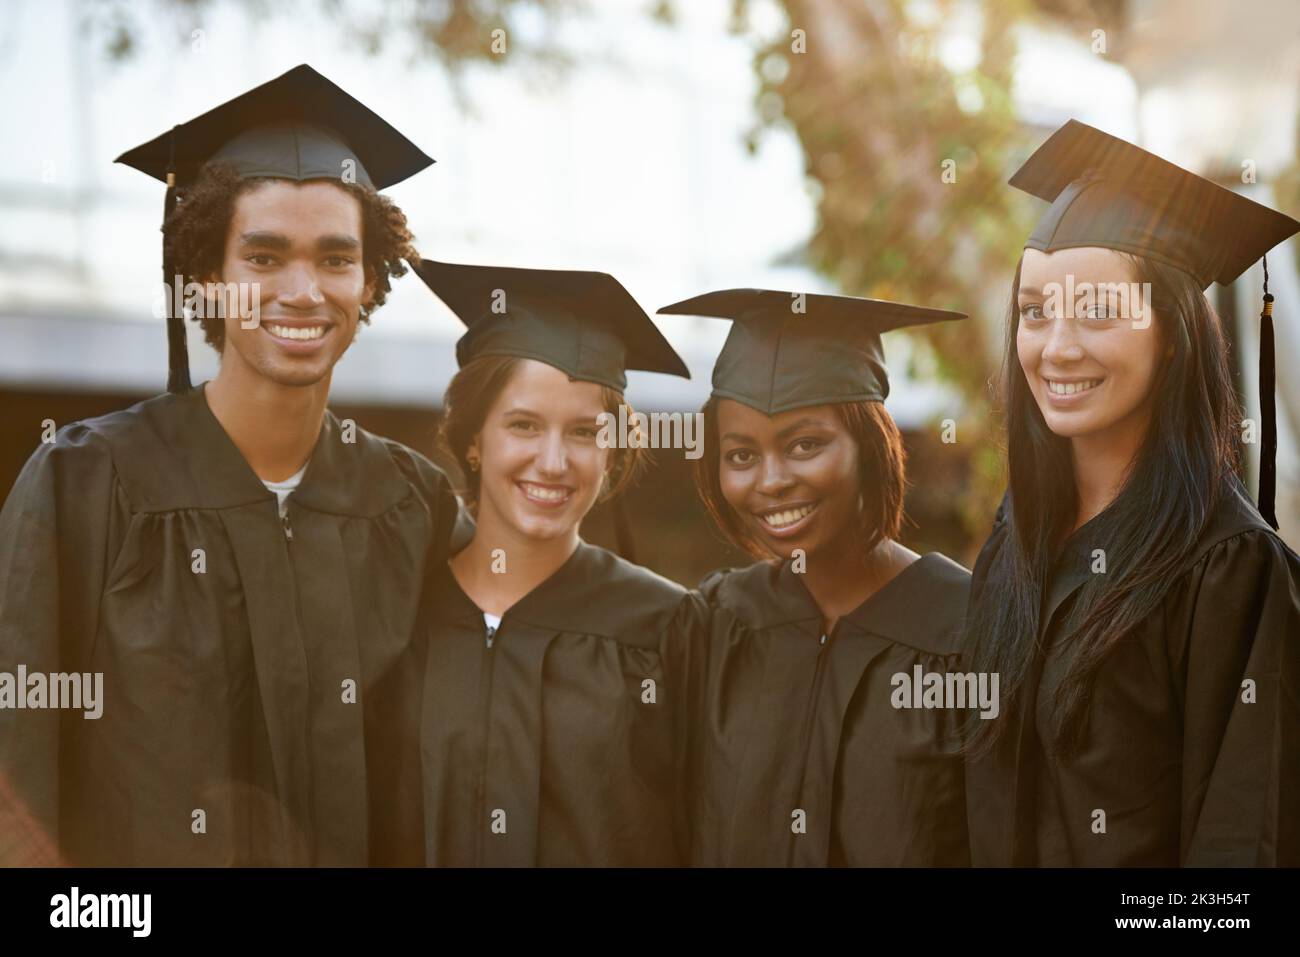 Proud to be graduates. A group of smiling college graduates standing together in cap and gown. Stock Photo